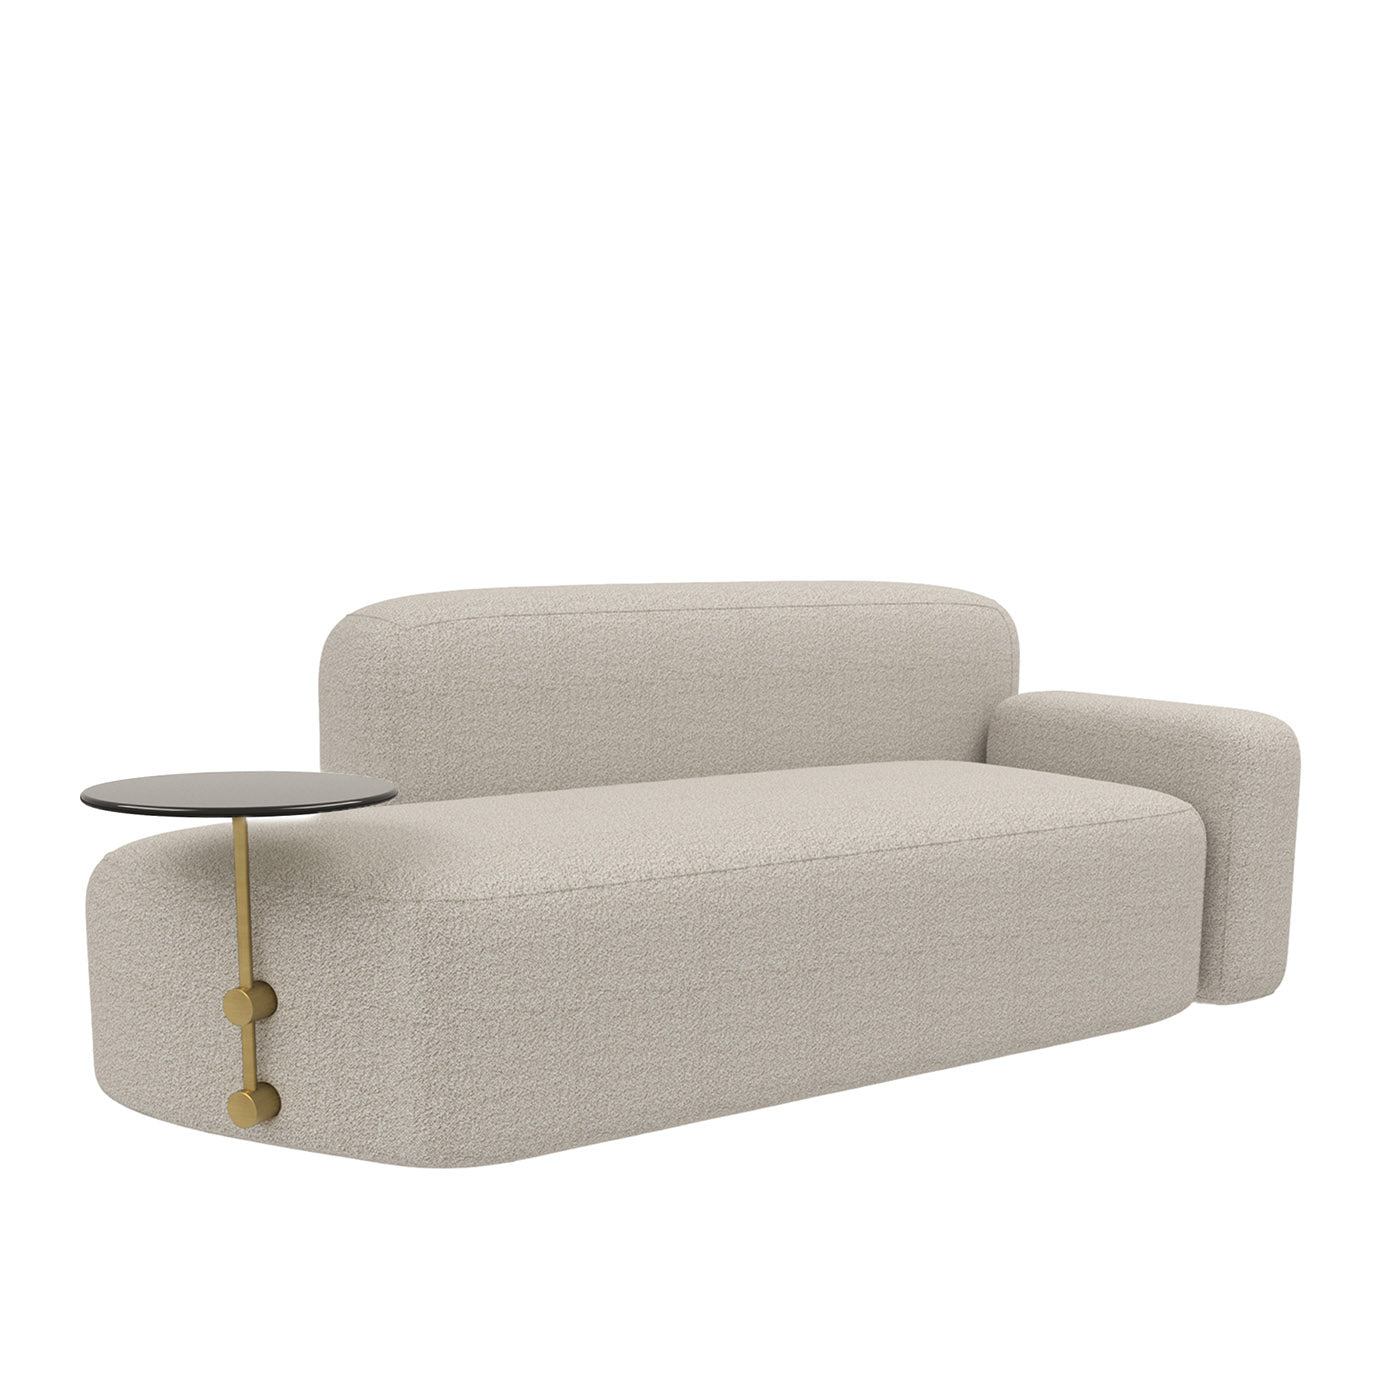 Mythos Right Sofa with Glass Side Table - Alternative view 1